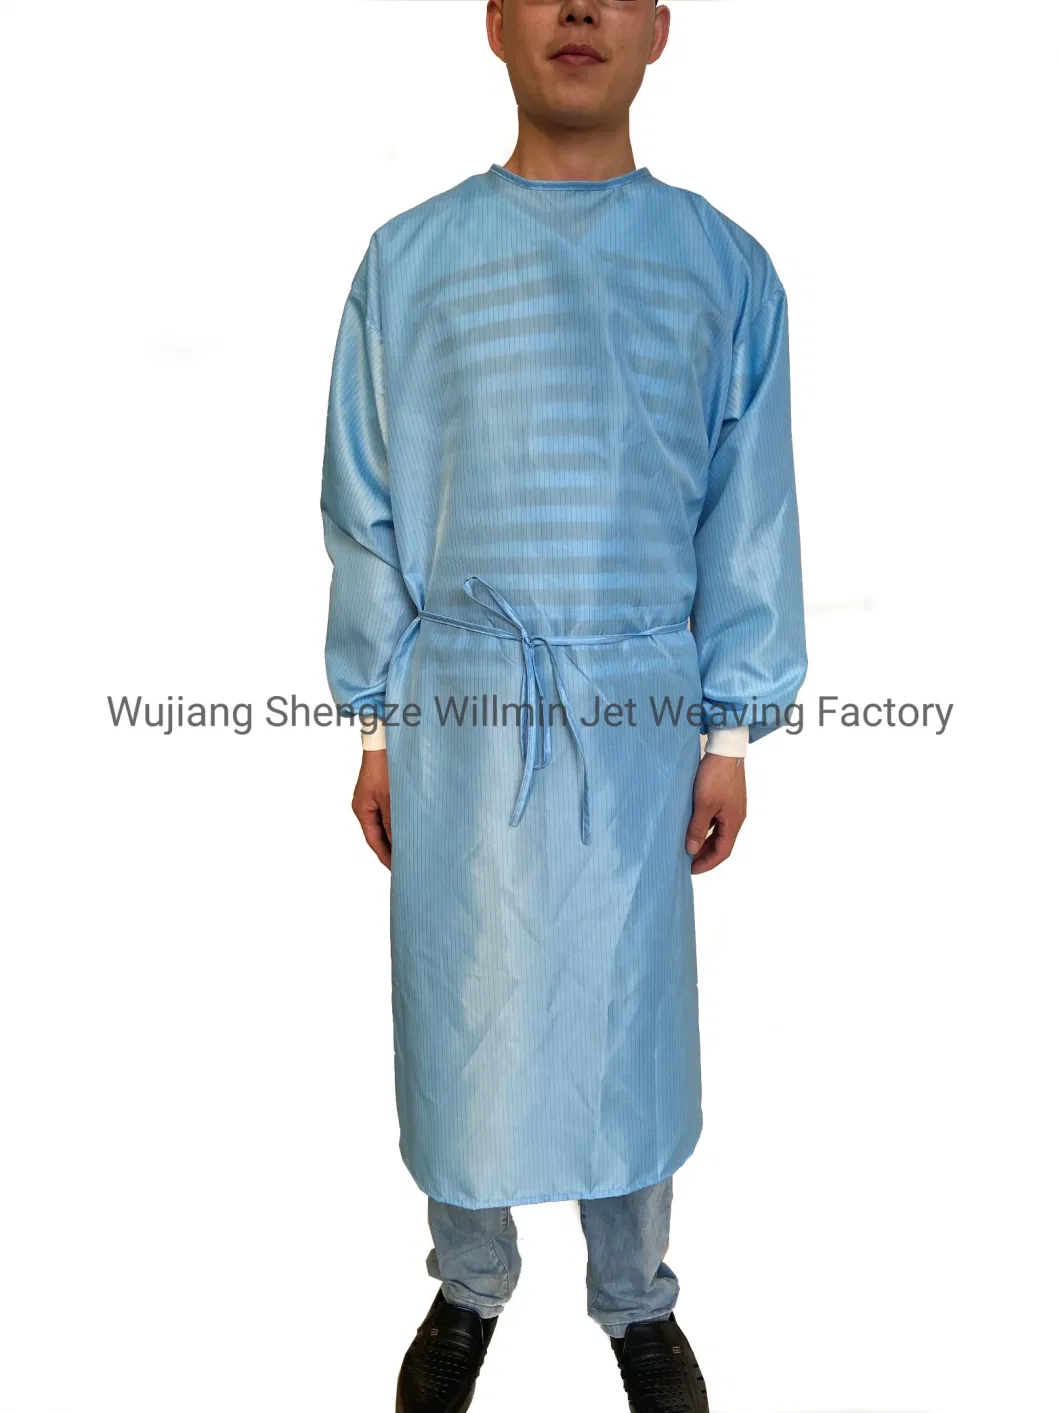 China Manufacturer Safety Antistatic Coveralls ESD Work Clothes for Lab